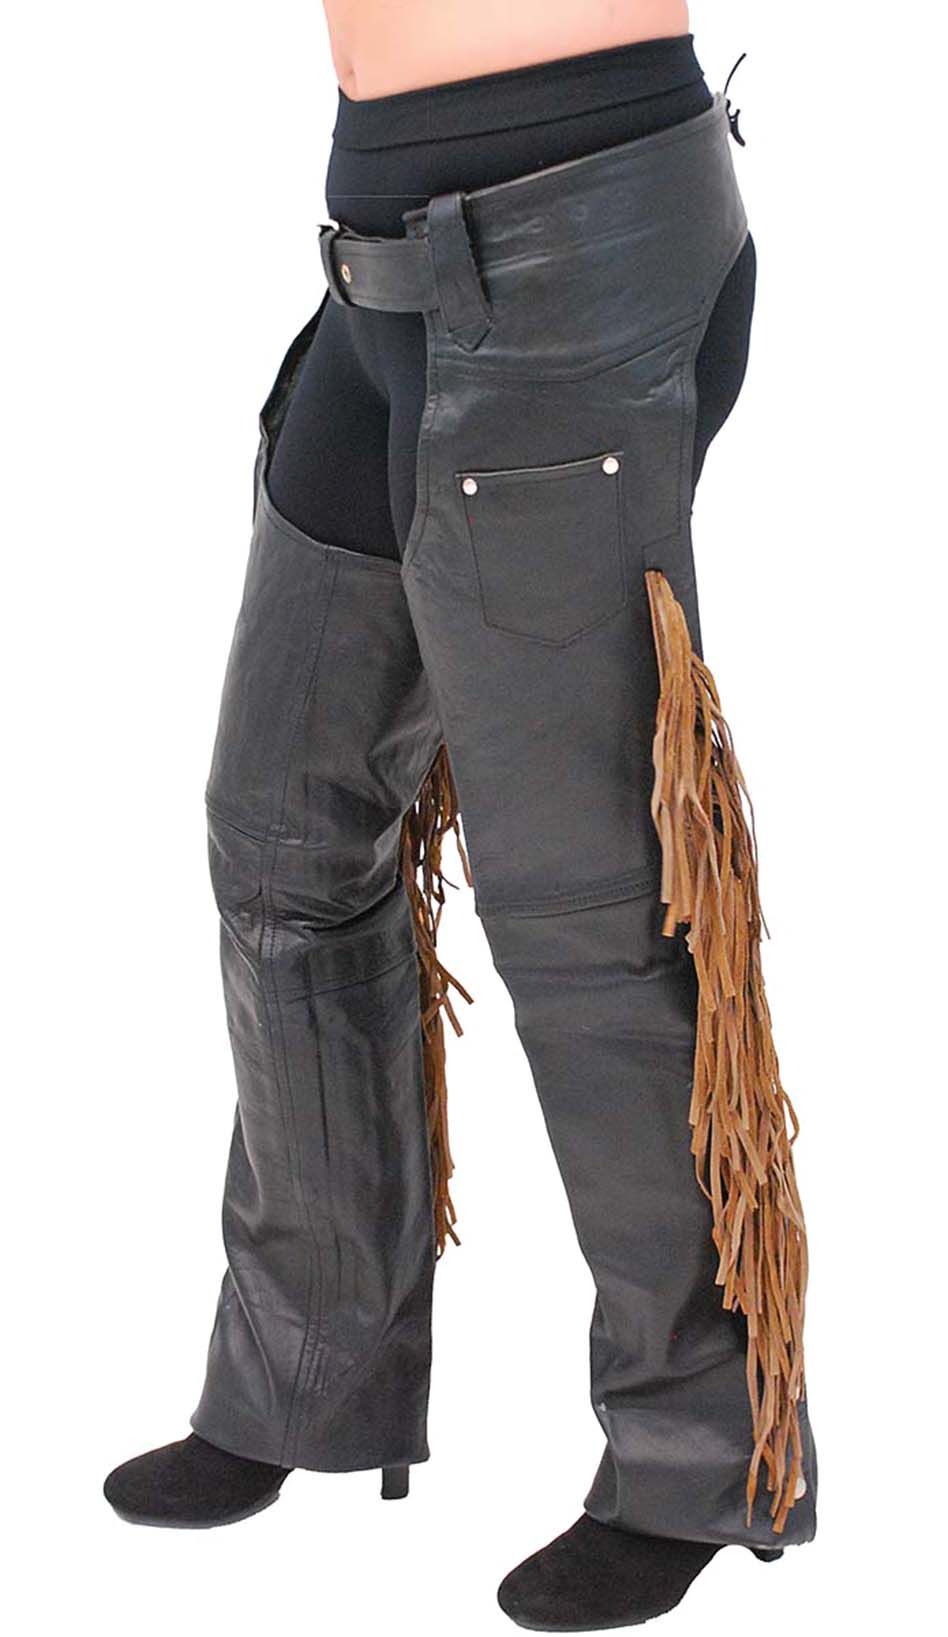 model wearing fringed leather chaps on sale